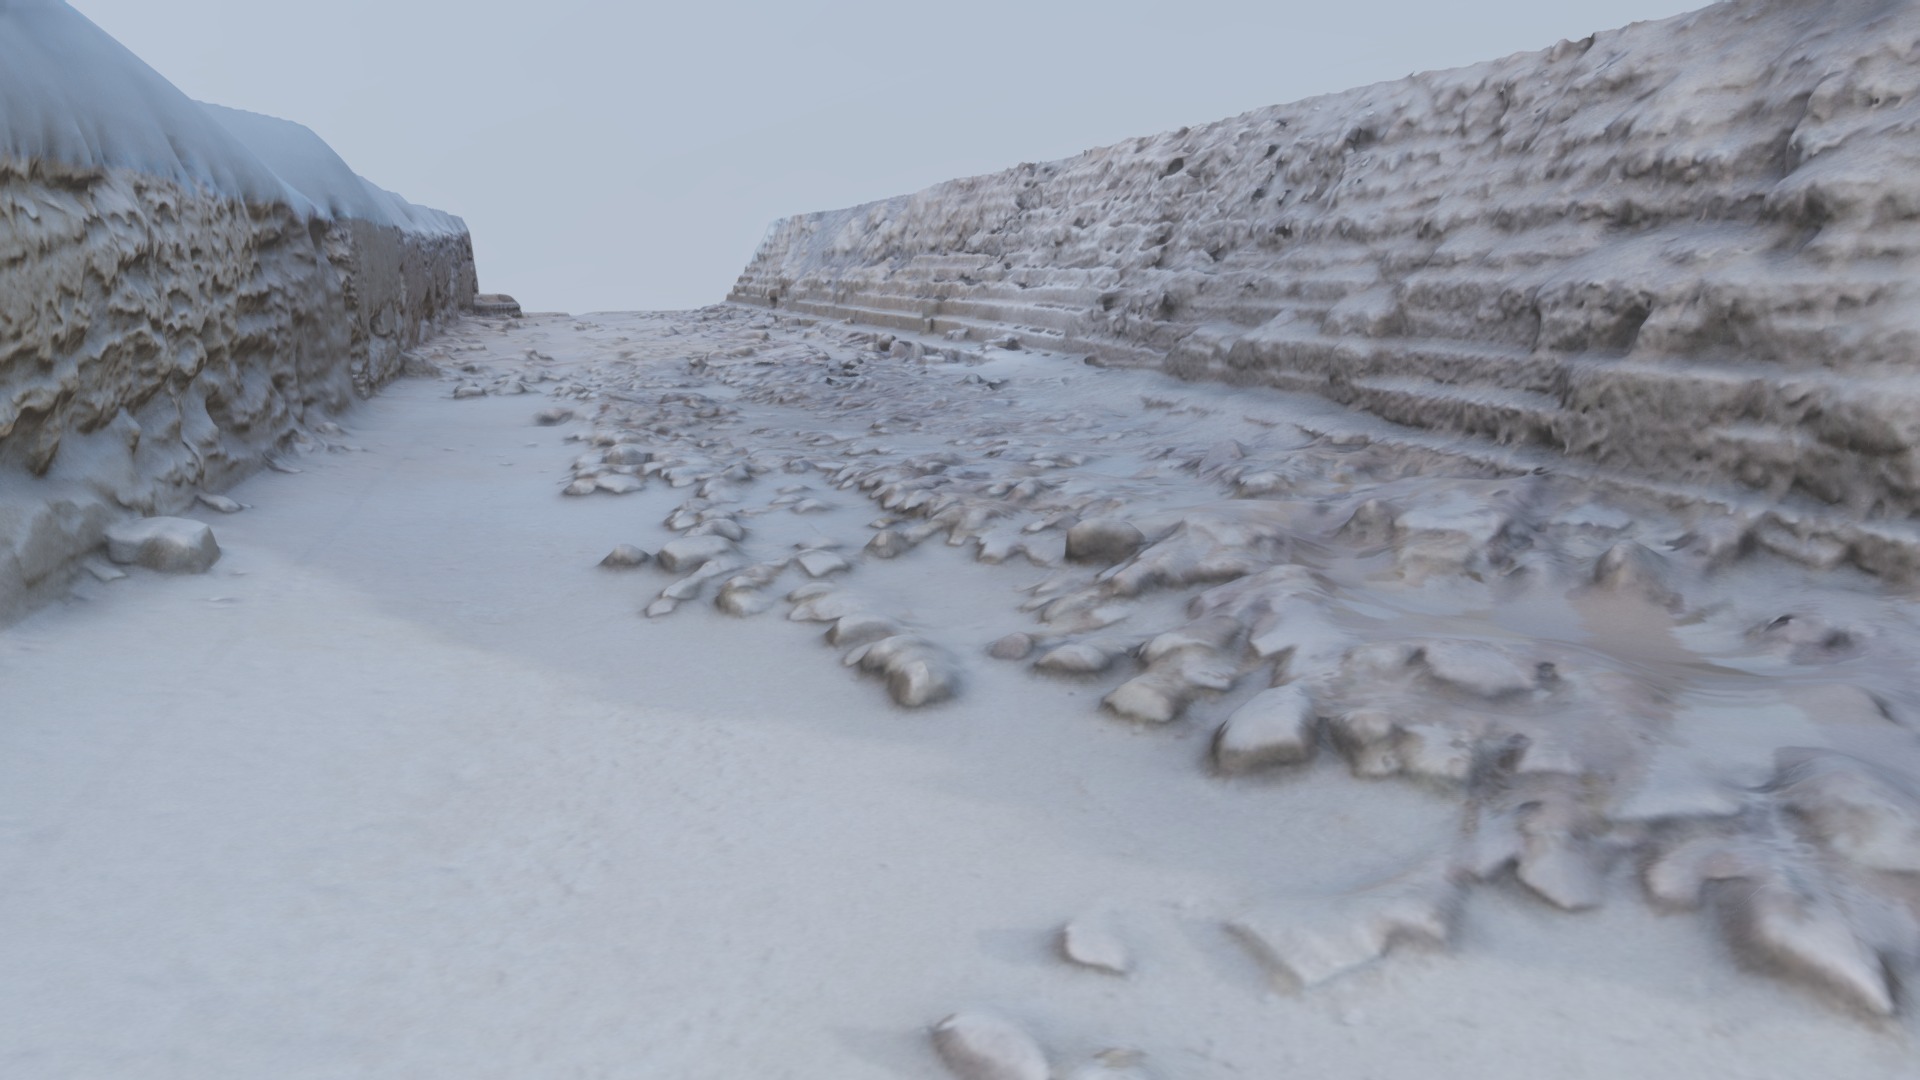 3D model Bedrock and rubble near Pyramid of Khafre – 2019 - This is a 3D model of the Bedrock and rubble near Pyramid of Khafre - 2019. The 3D model is about a snowy landscape with rocks.